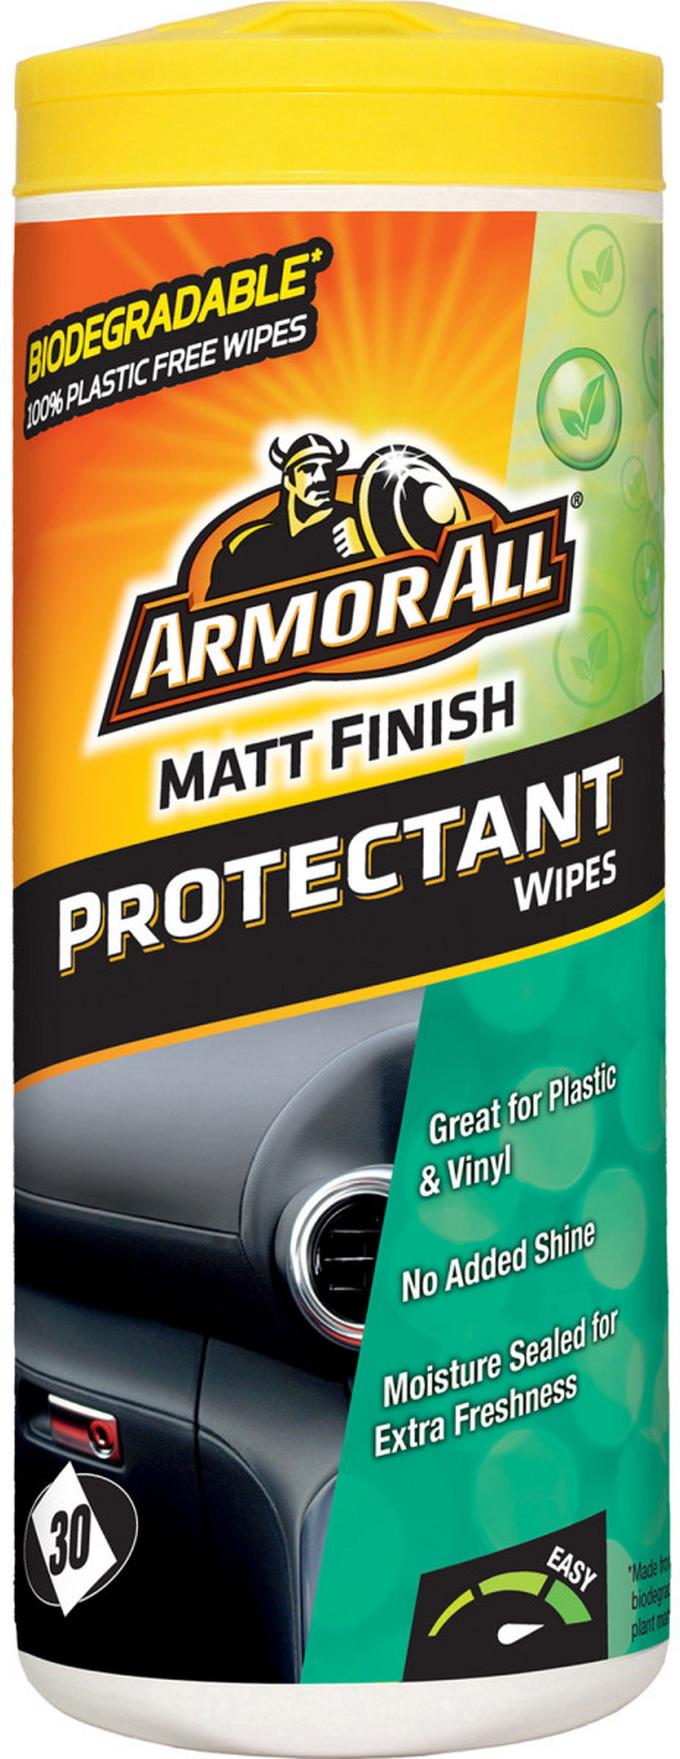 Armor all cleaning wipes ruined my dash?